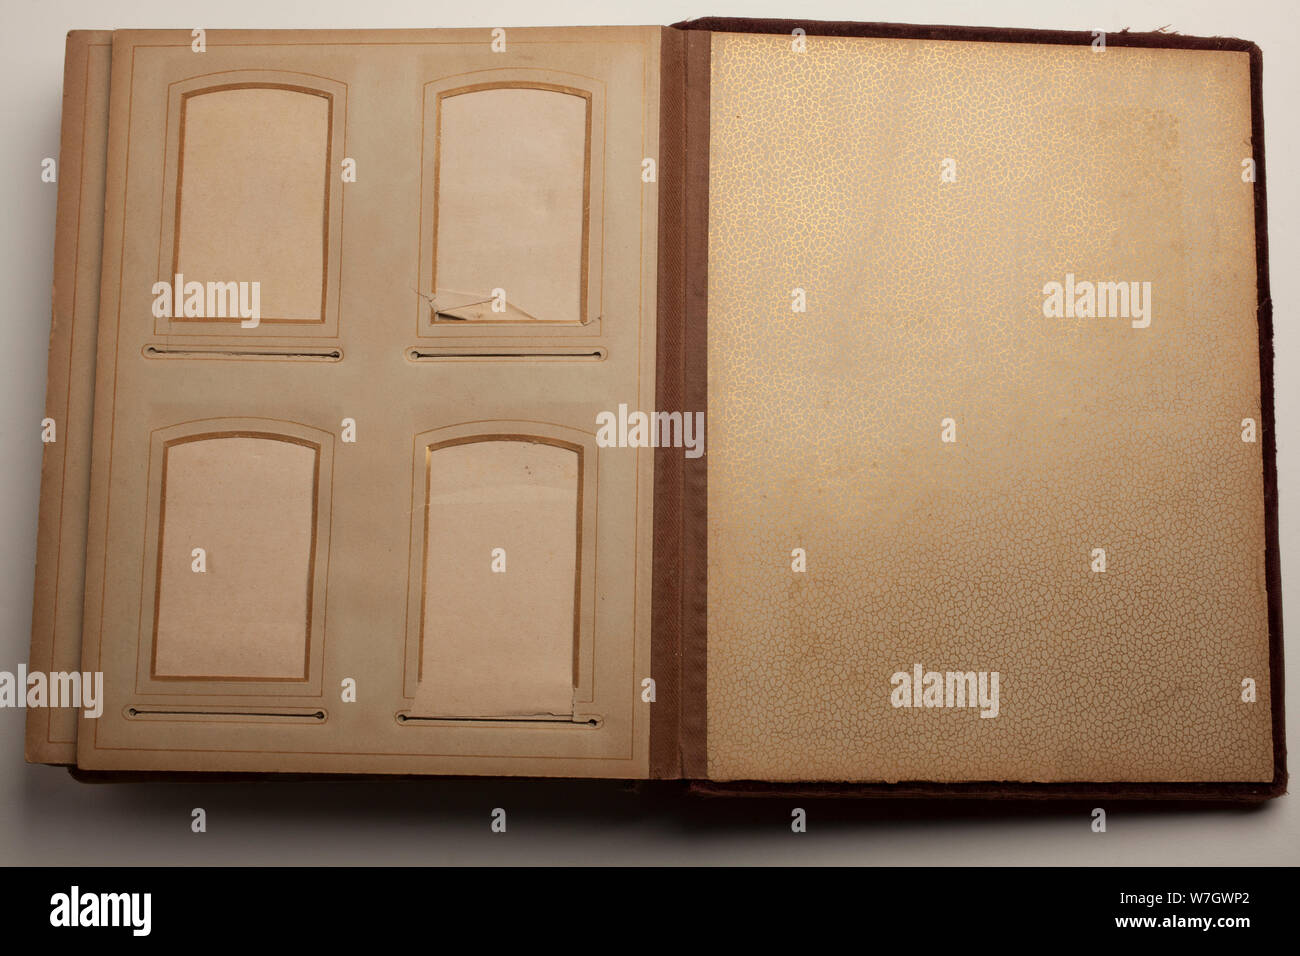 Beautiful end paper of an old photographic album with empty windows for prints. Stock Photo